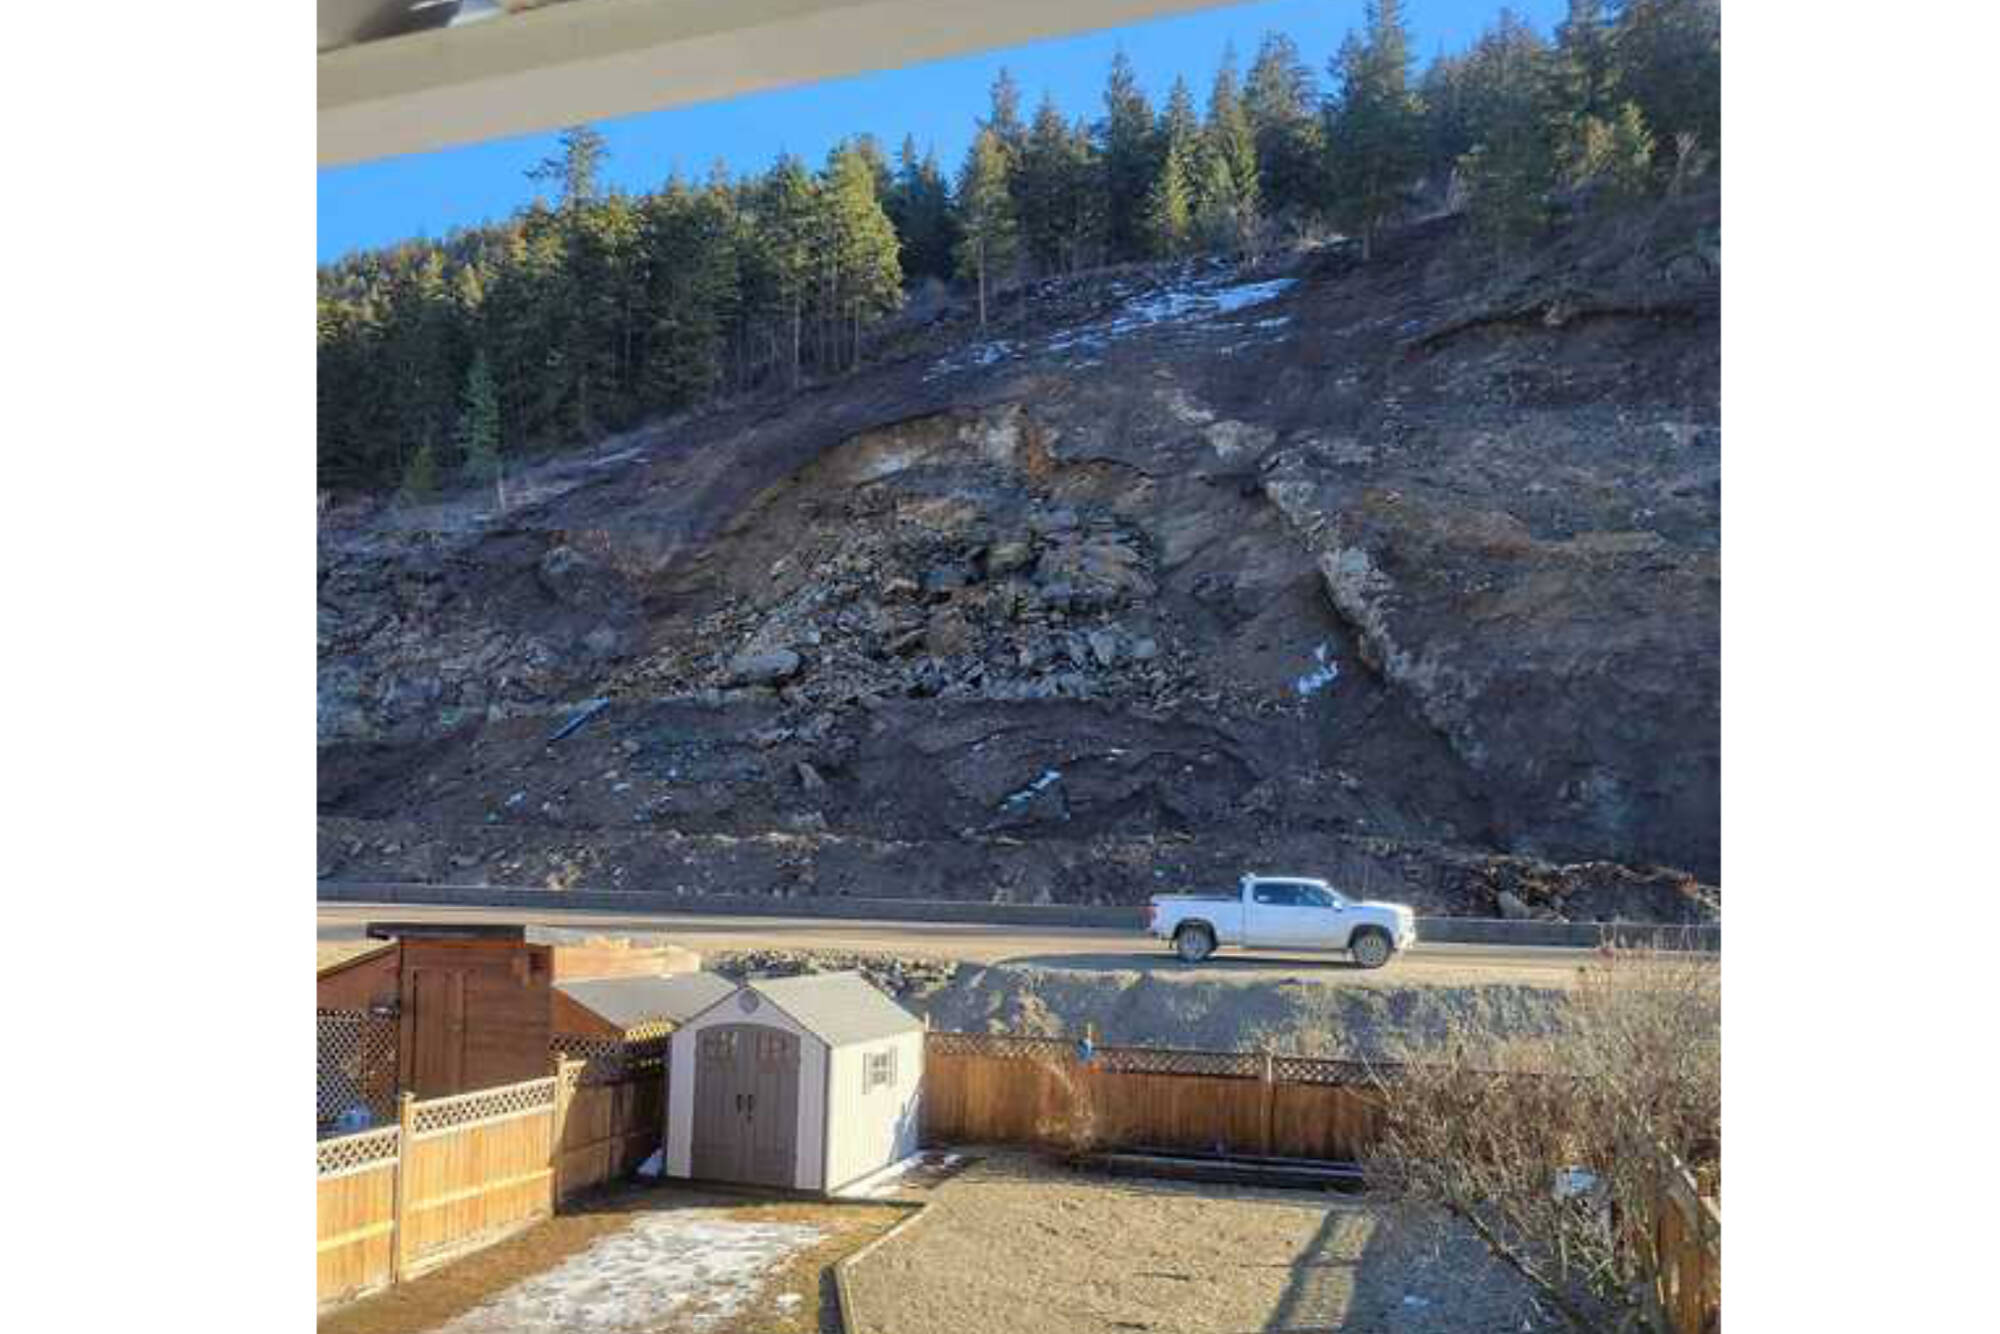 Chase resident Kim Harvey shared this photo of the unstable slope that prompted the closure of Highway 1. (Kim Harvey photo)